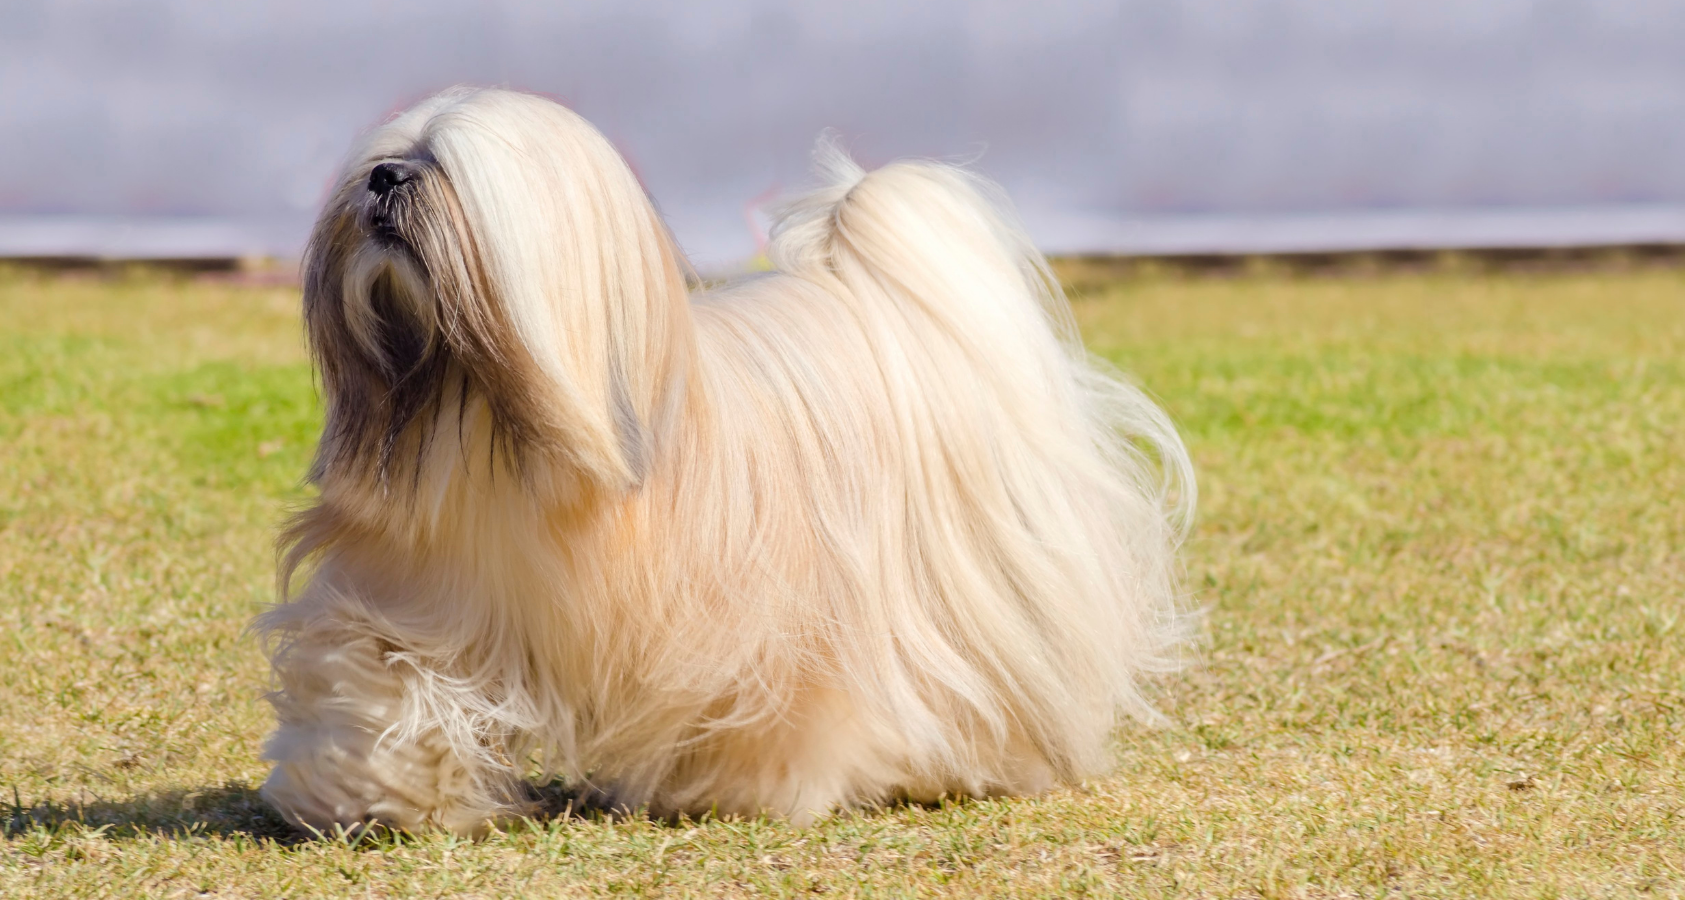 6 Dogs That Look Like Chewbacca